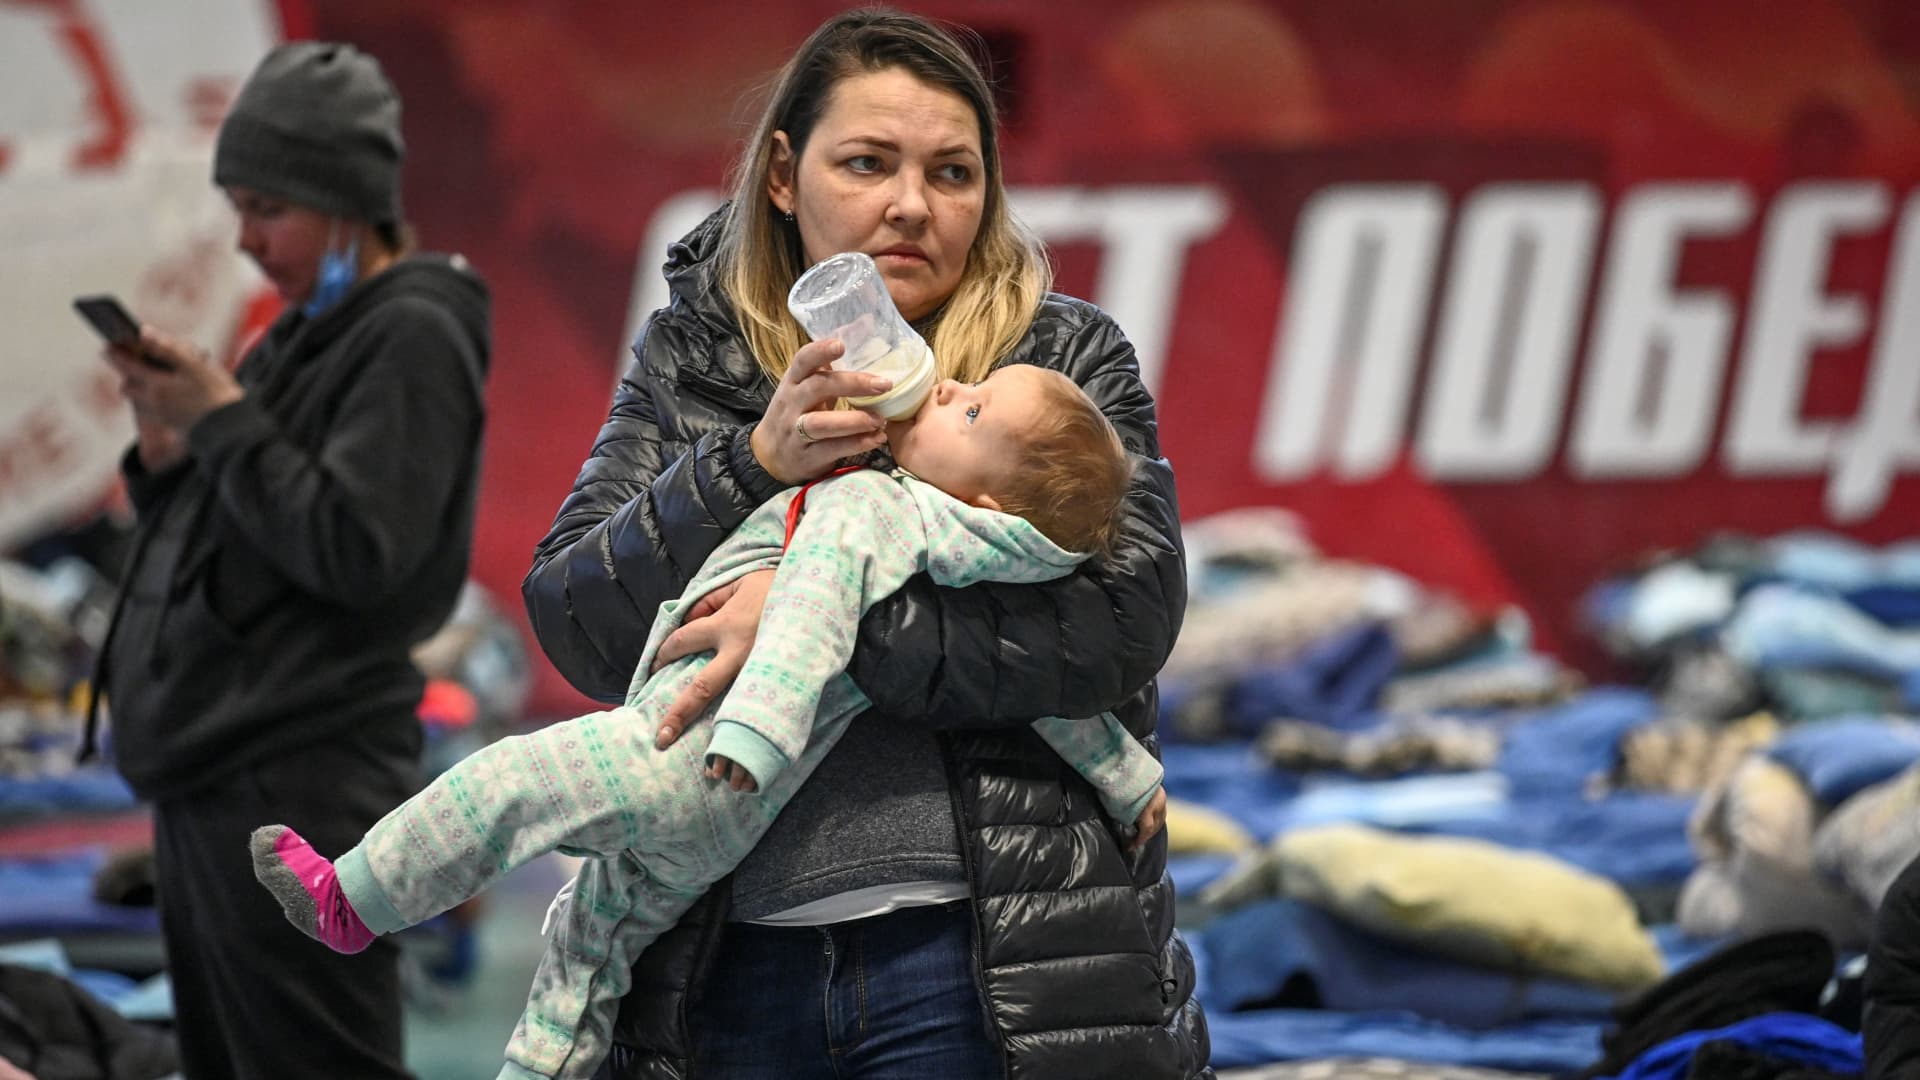 A woman evacuated from the Ukrainian city of Mariupol feeds a child at a temporary accommodation centre for evacuees located in the building of a local sports school in Taganrog in the Rostov region, Russia March 23, 2022.